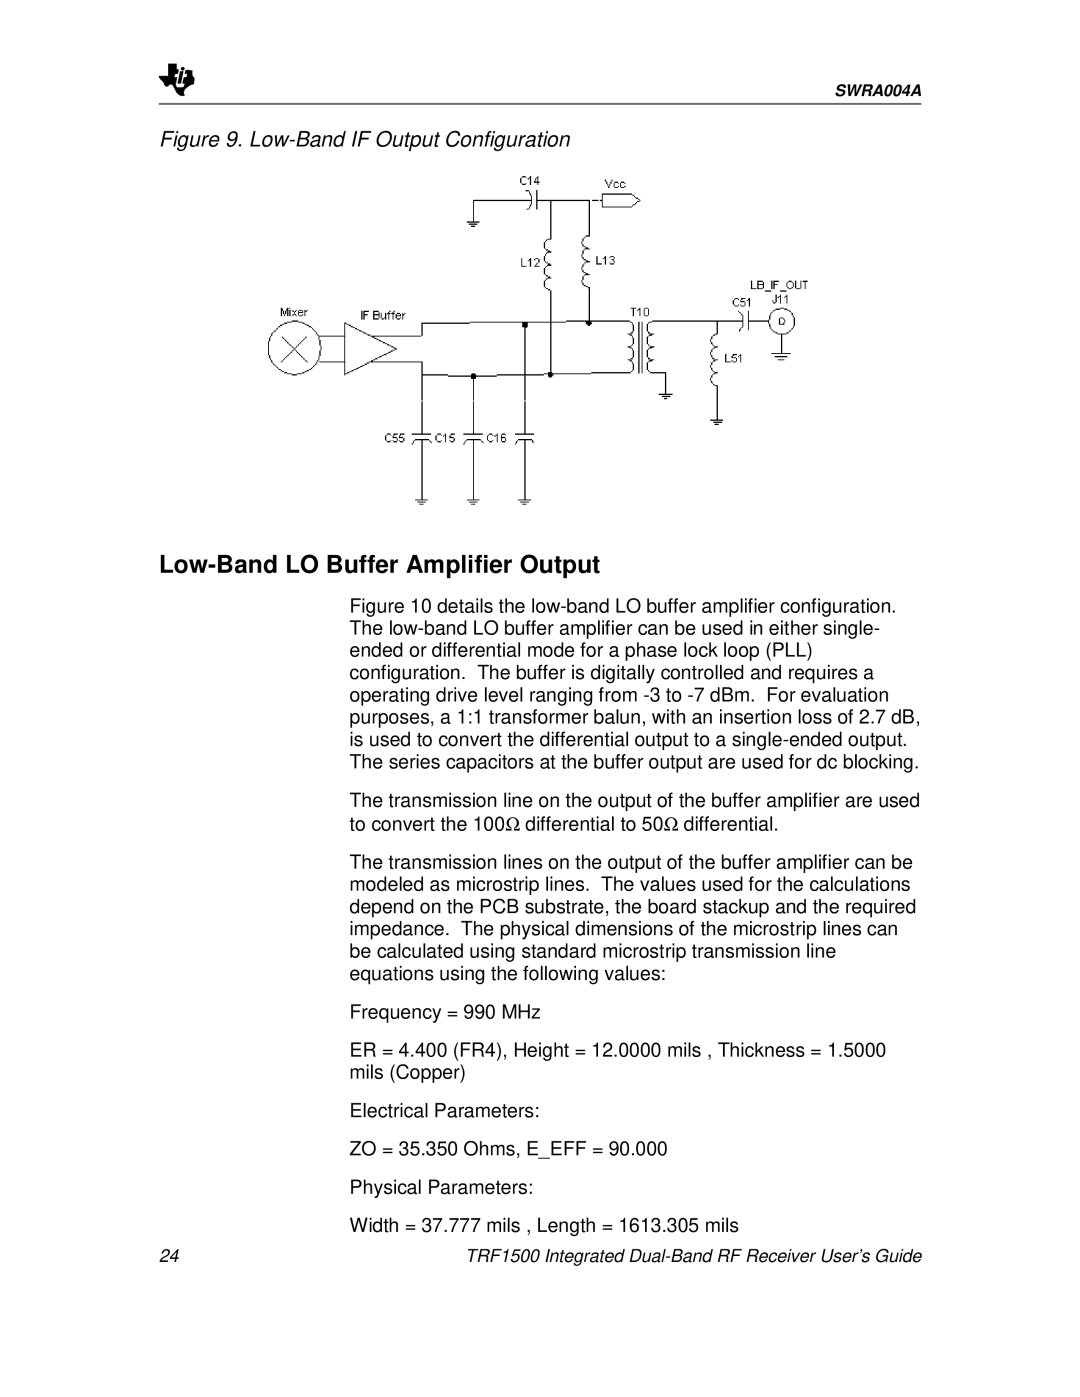 Texas Instruments TRF1500 manual Low-BandLO Buffer Amplifier Output, Low-BandIF Output Configuration 